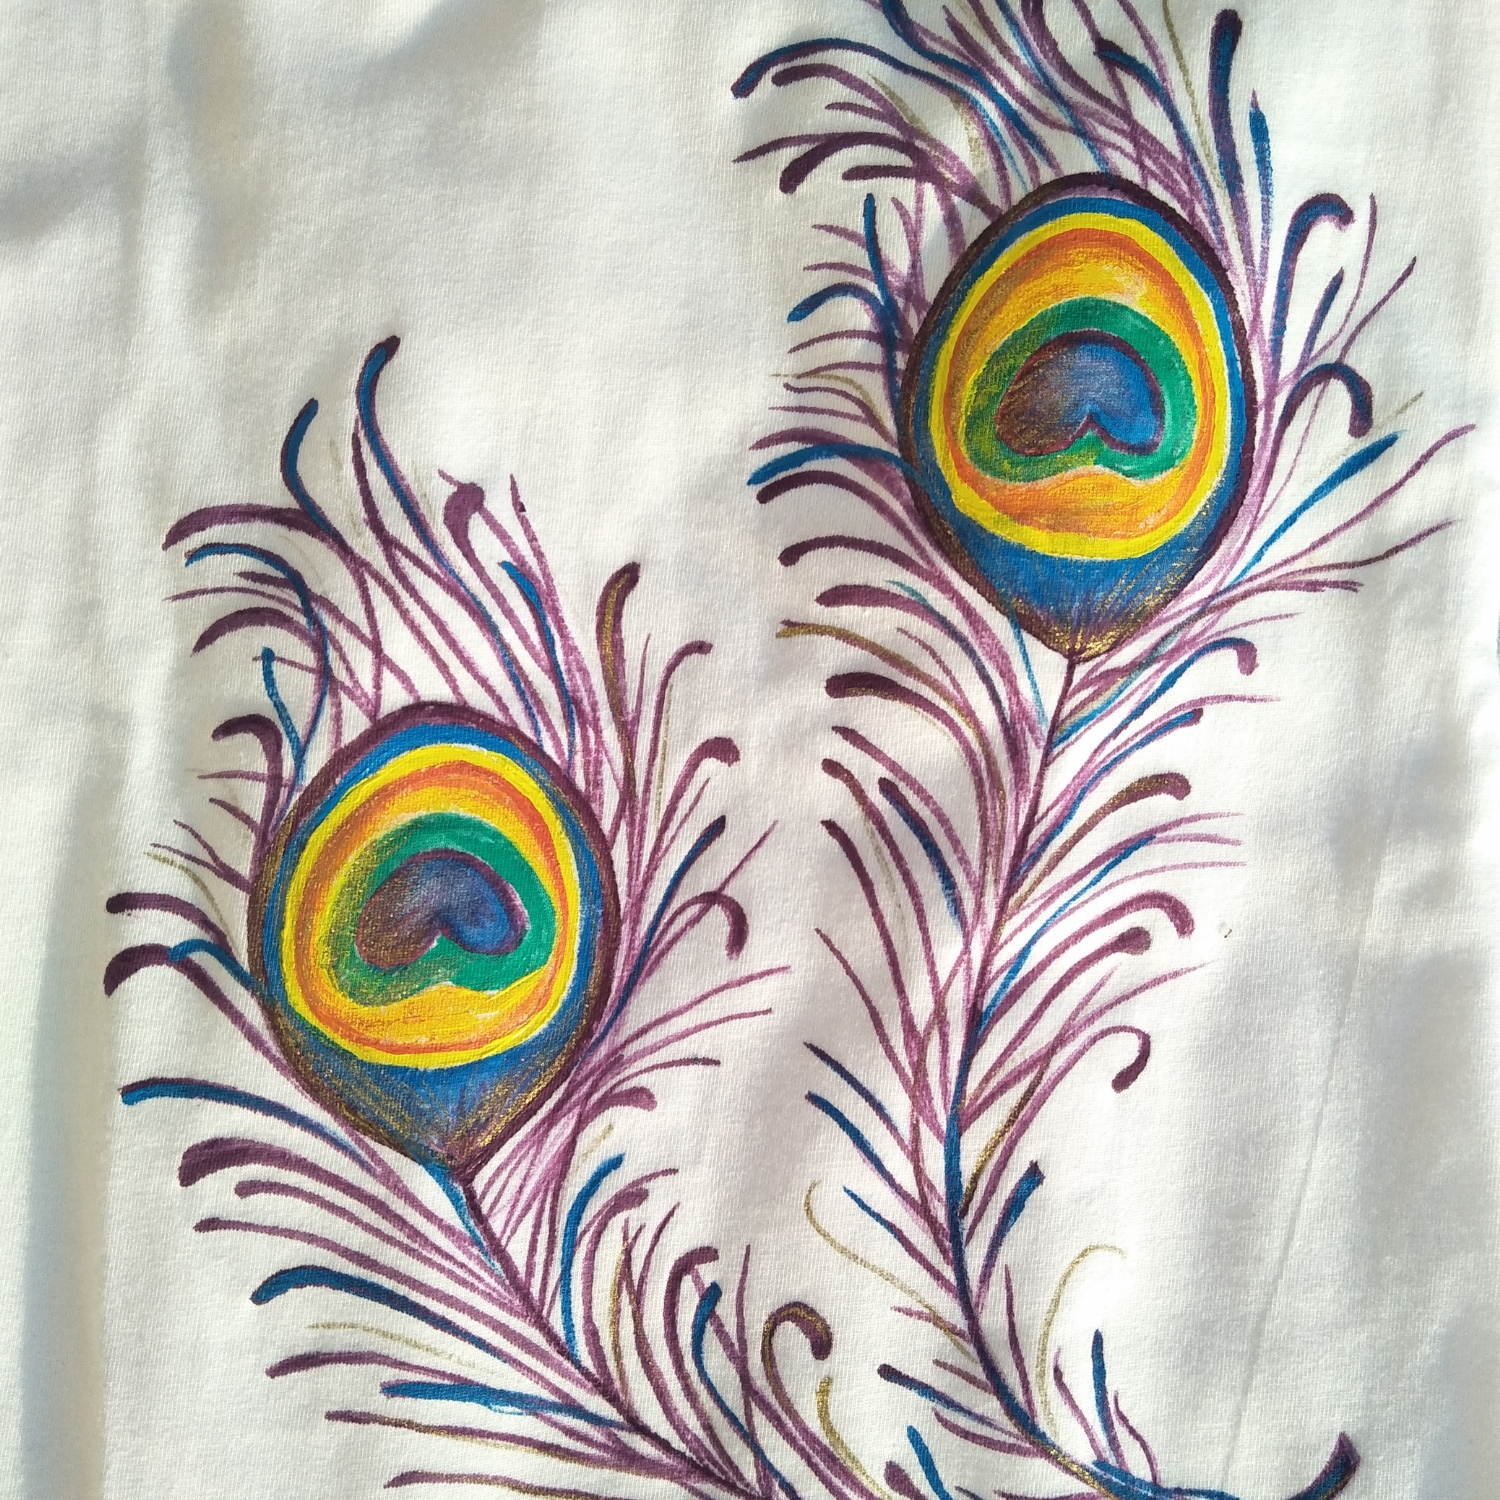 Peacock feather hand painted on Tshirt